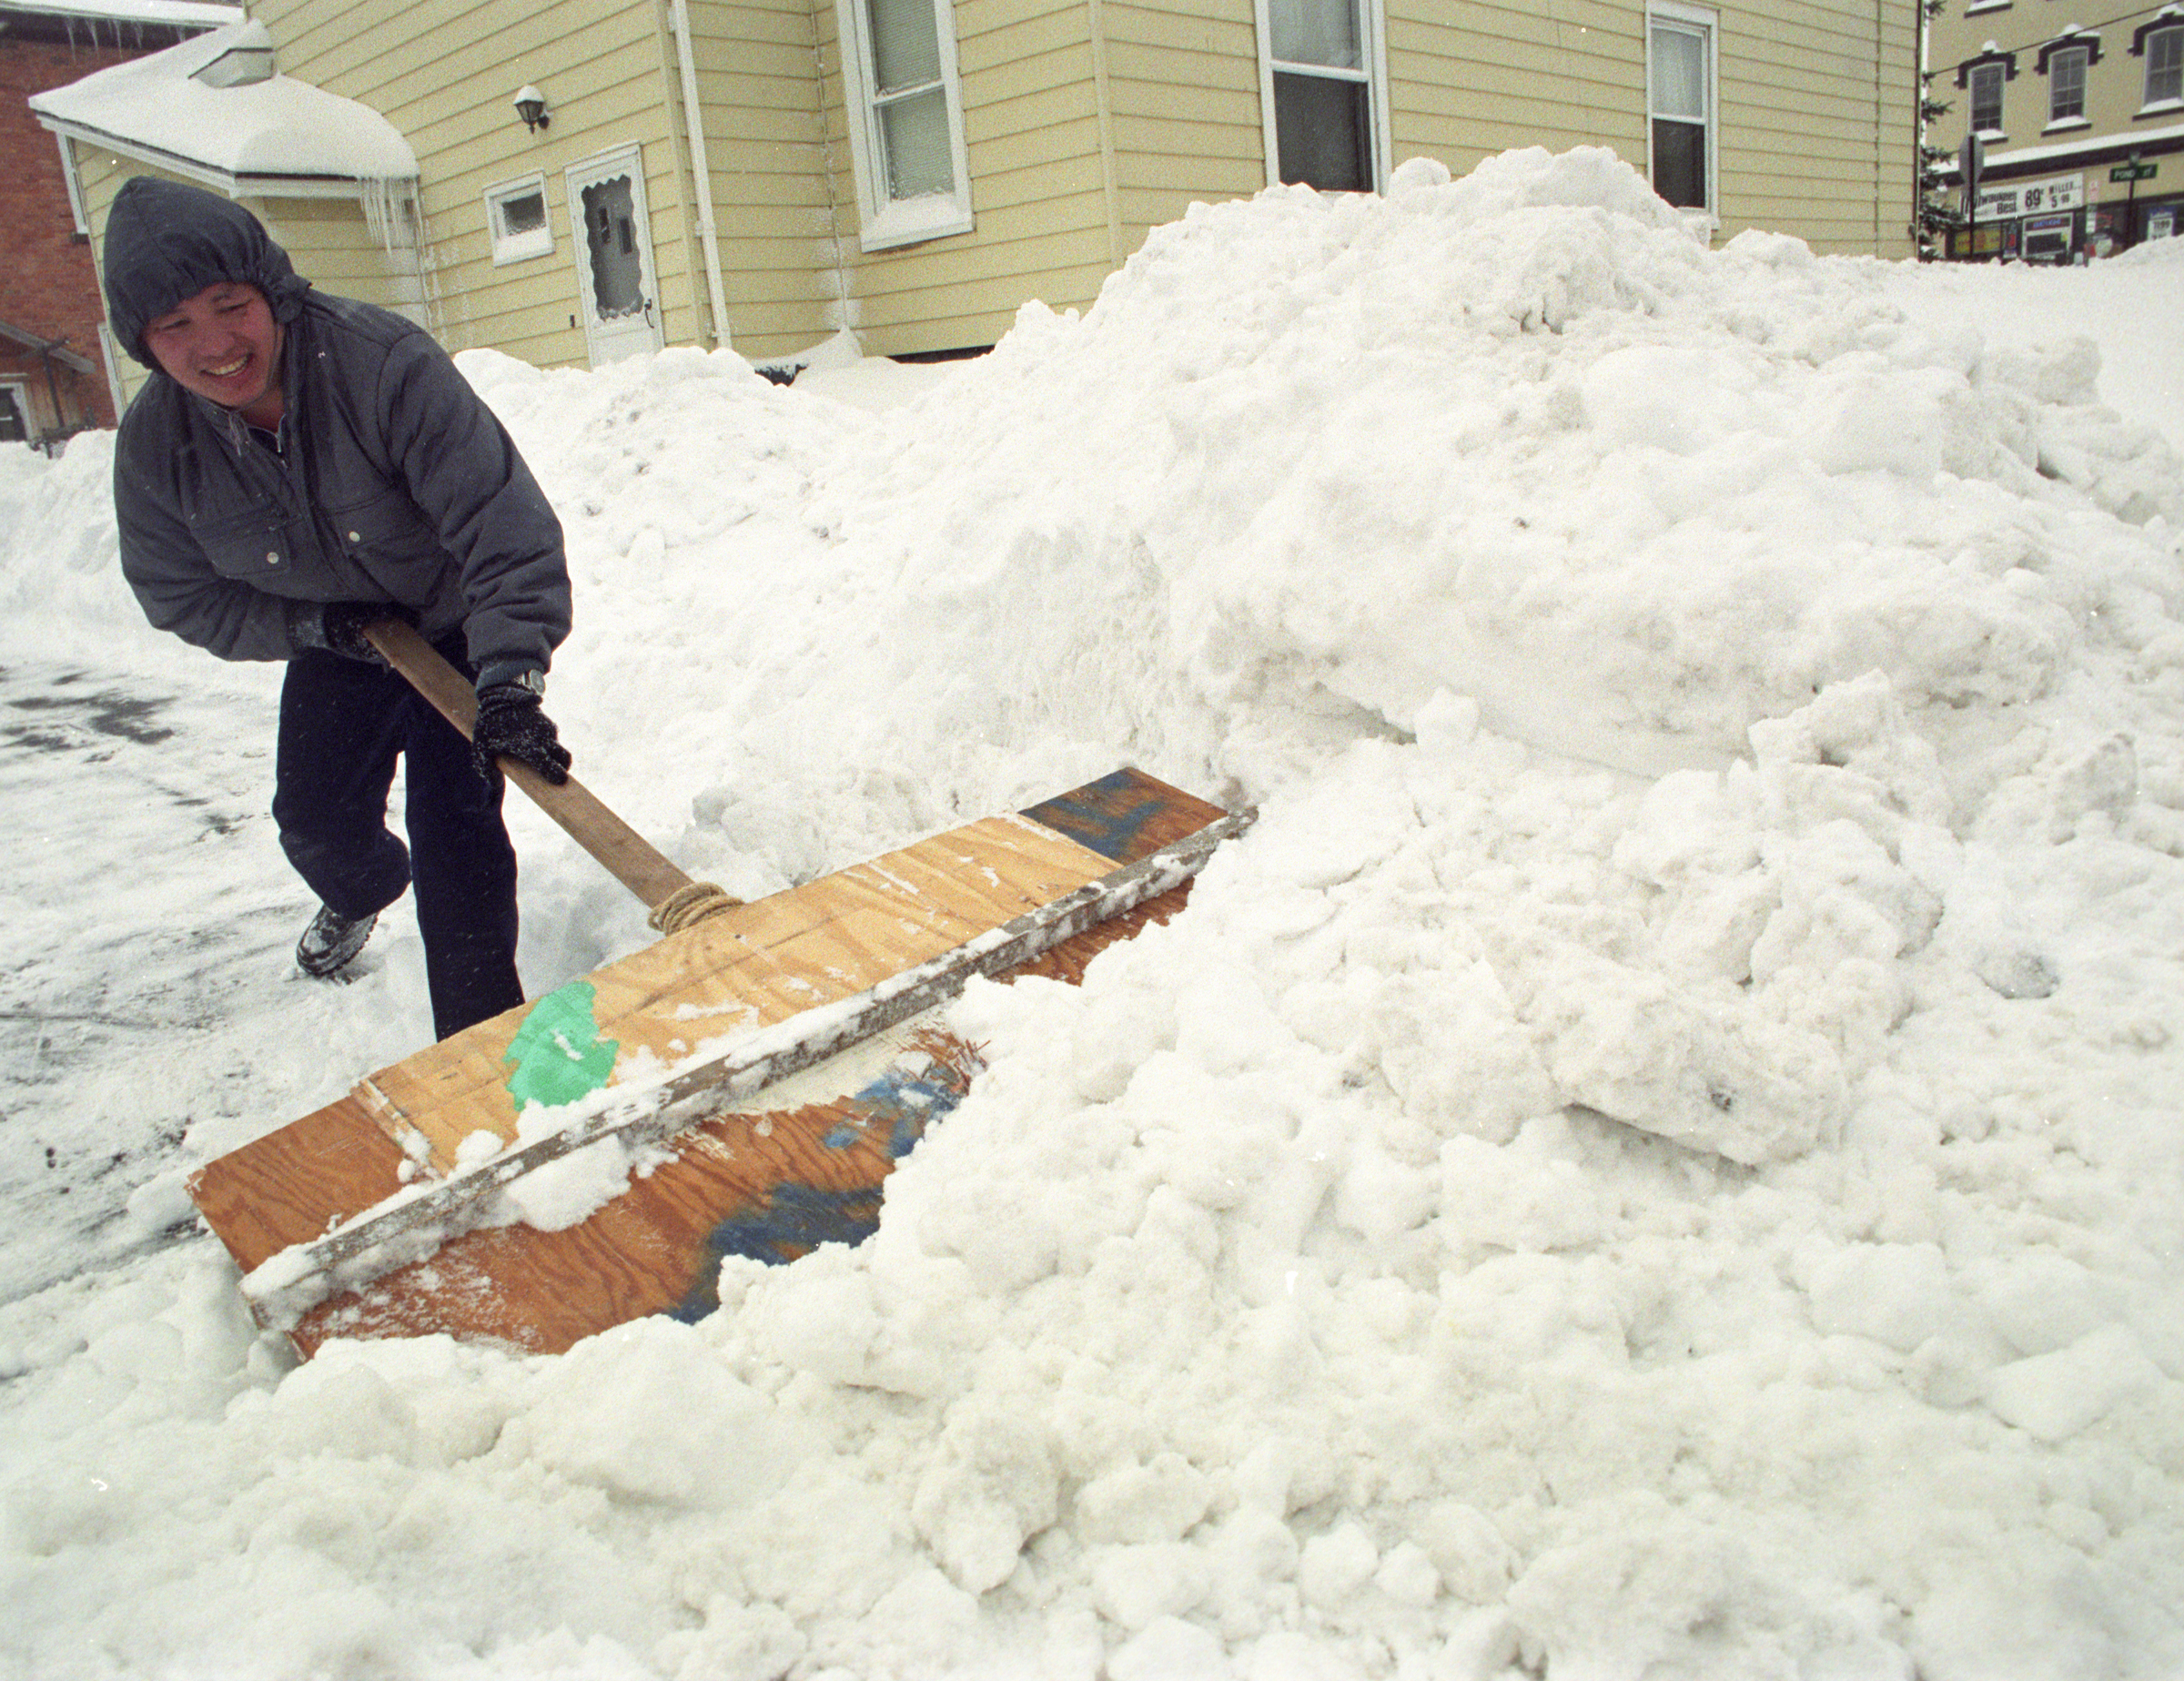 Cher Pao Vang of Syracuse uses a home made shovel to clear snow from his driveway from a storm that dumped some 40 inches of snow on the area. Nicholas Lisi / The Post-Standard